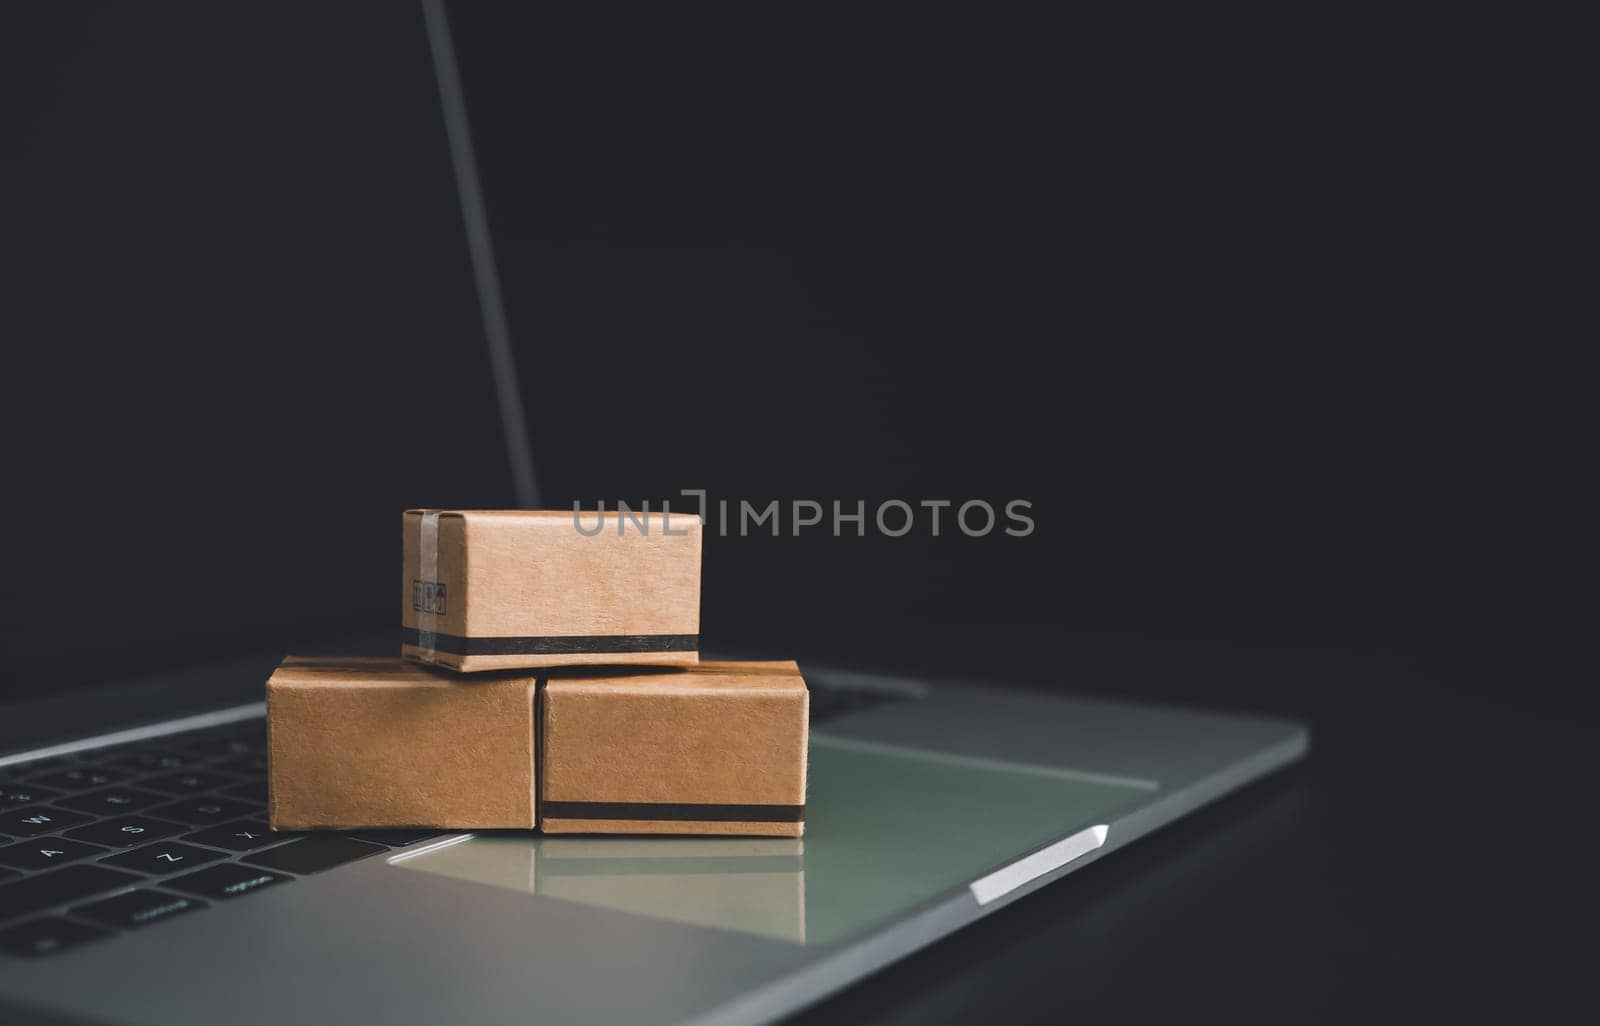 Boxes on a laptop keyboard on dark background. Ideas about online shopping, online shopping is a form of electronic commerce that allows consumers to directly buy goods from seller over the internet. by Unimages2527